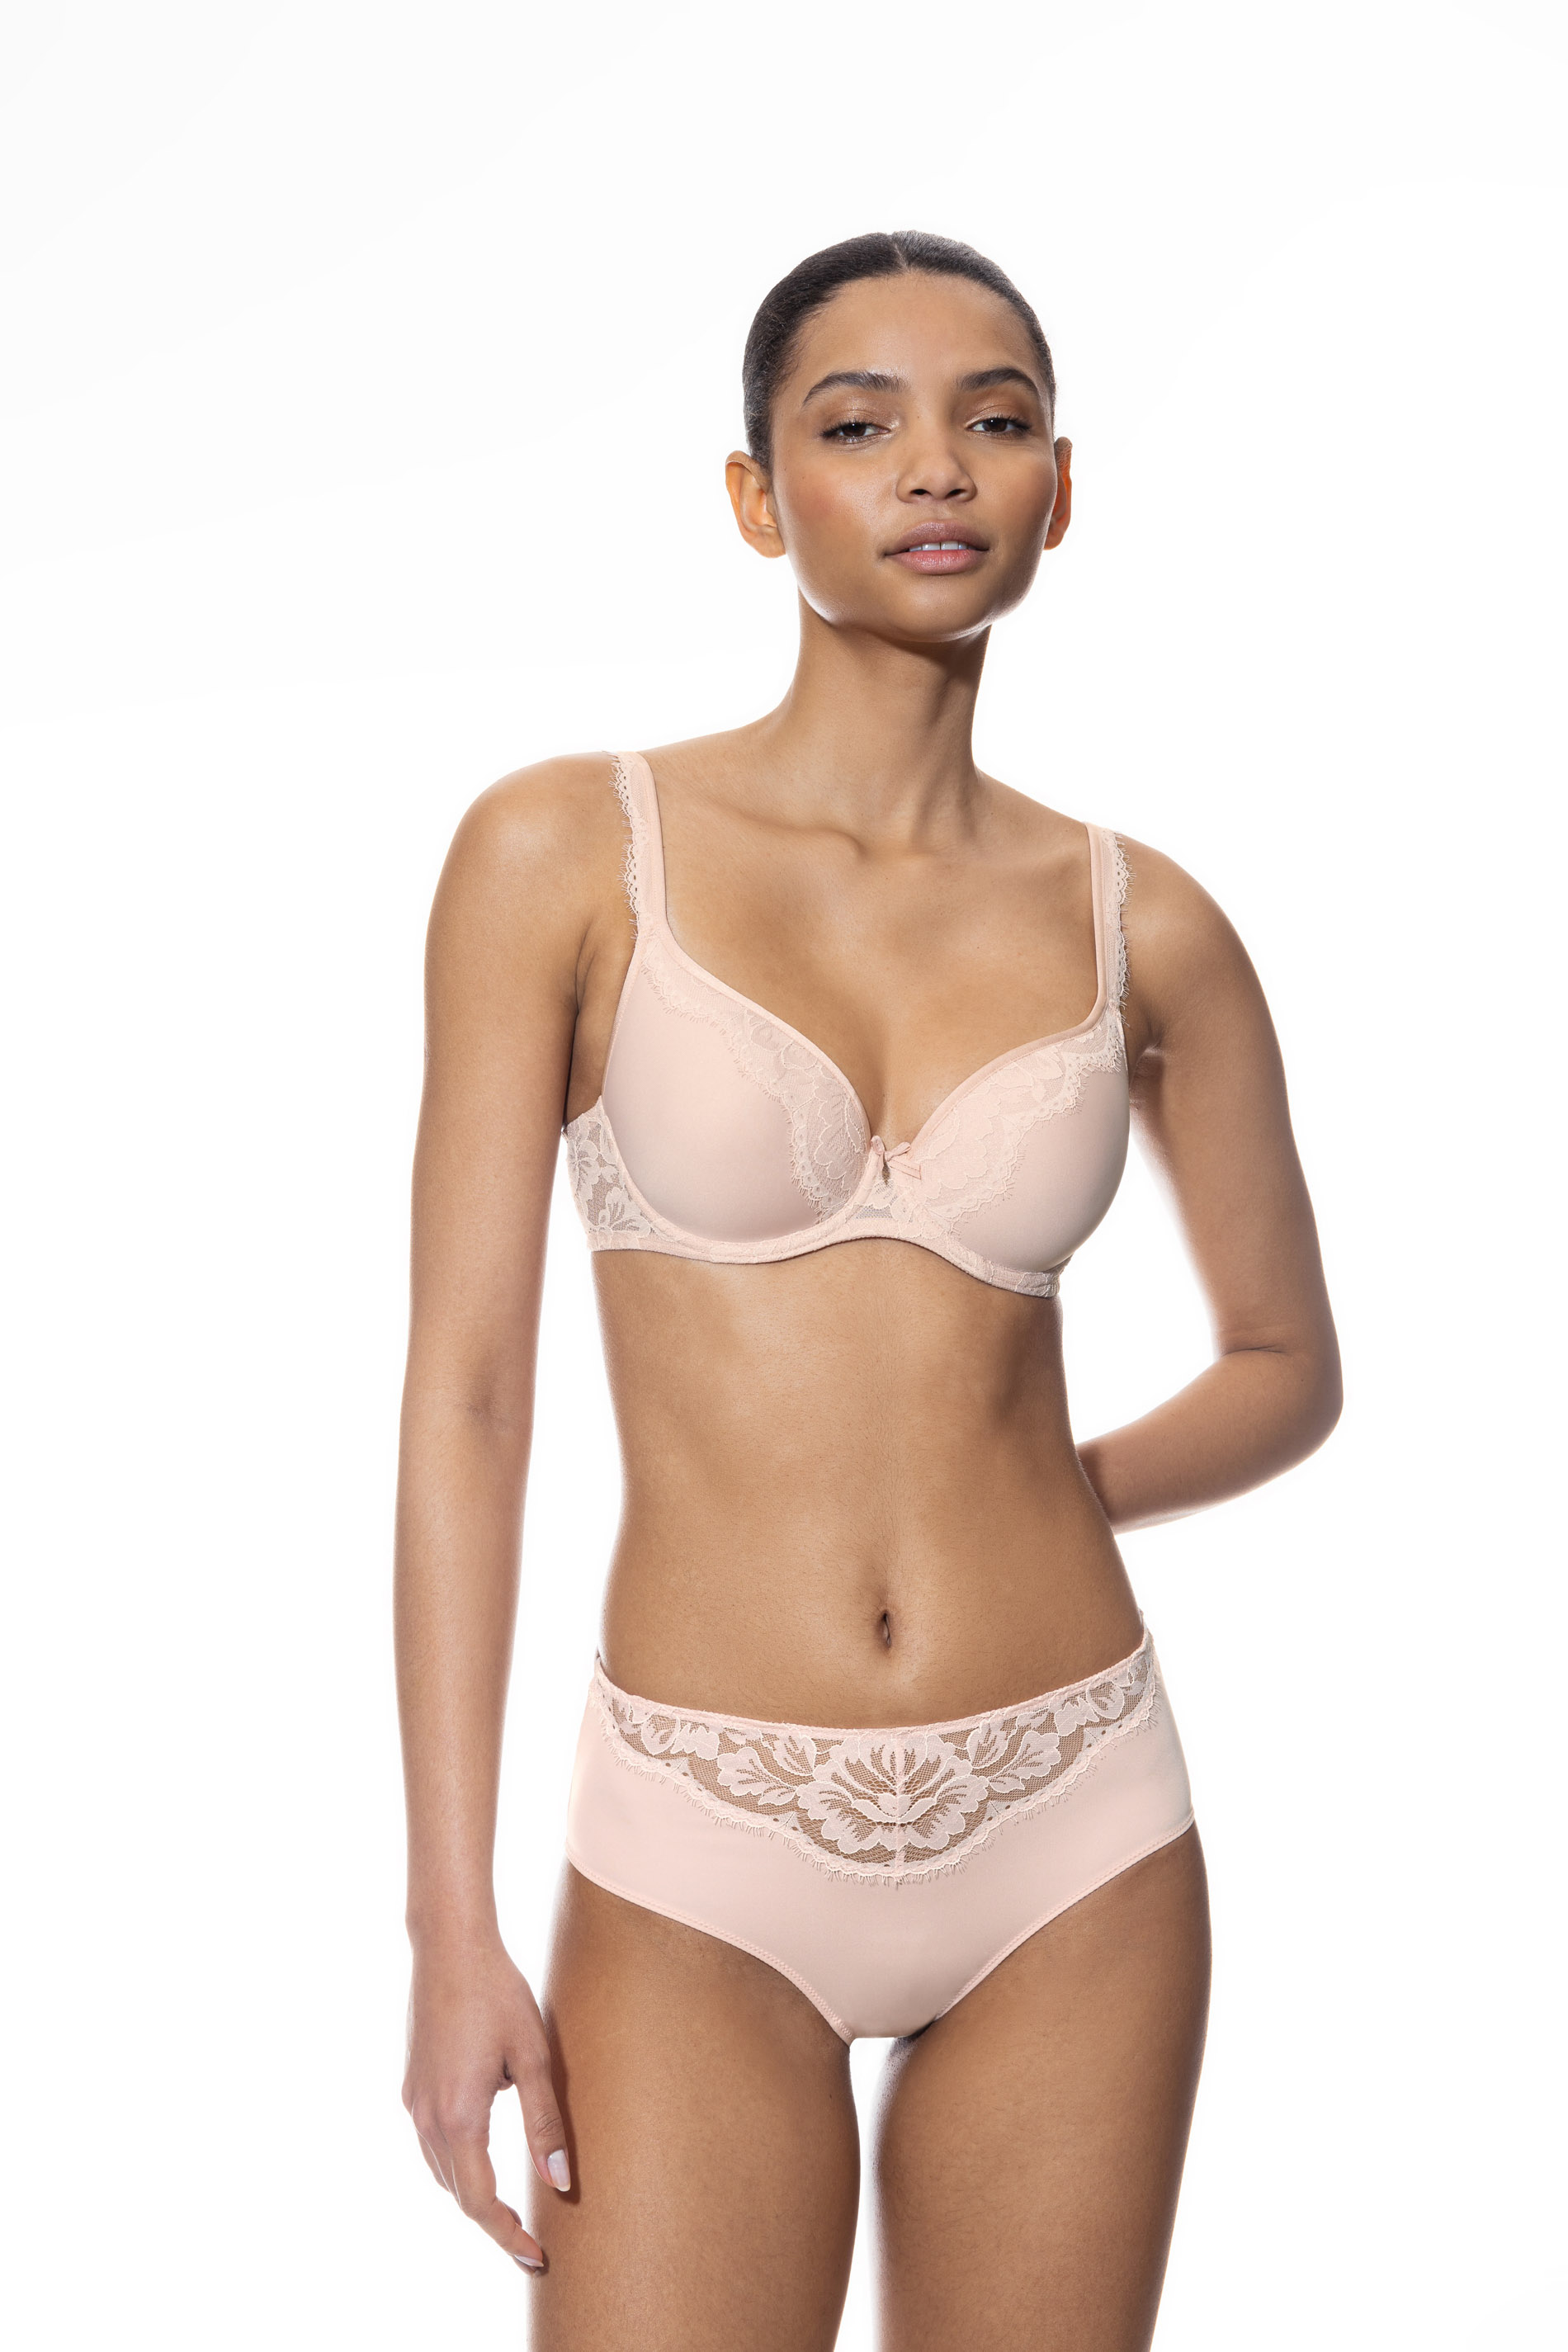 Spacer bra | Full Cup Blossom Serie Amazing Front View | mey®